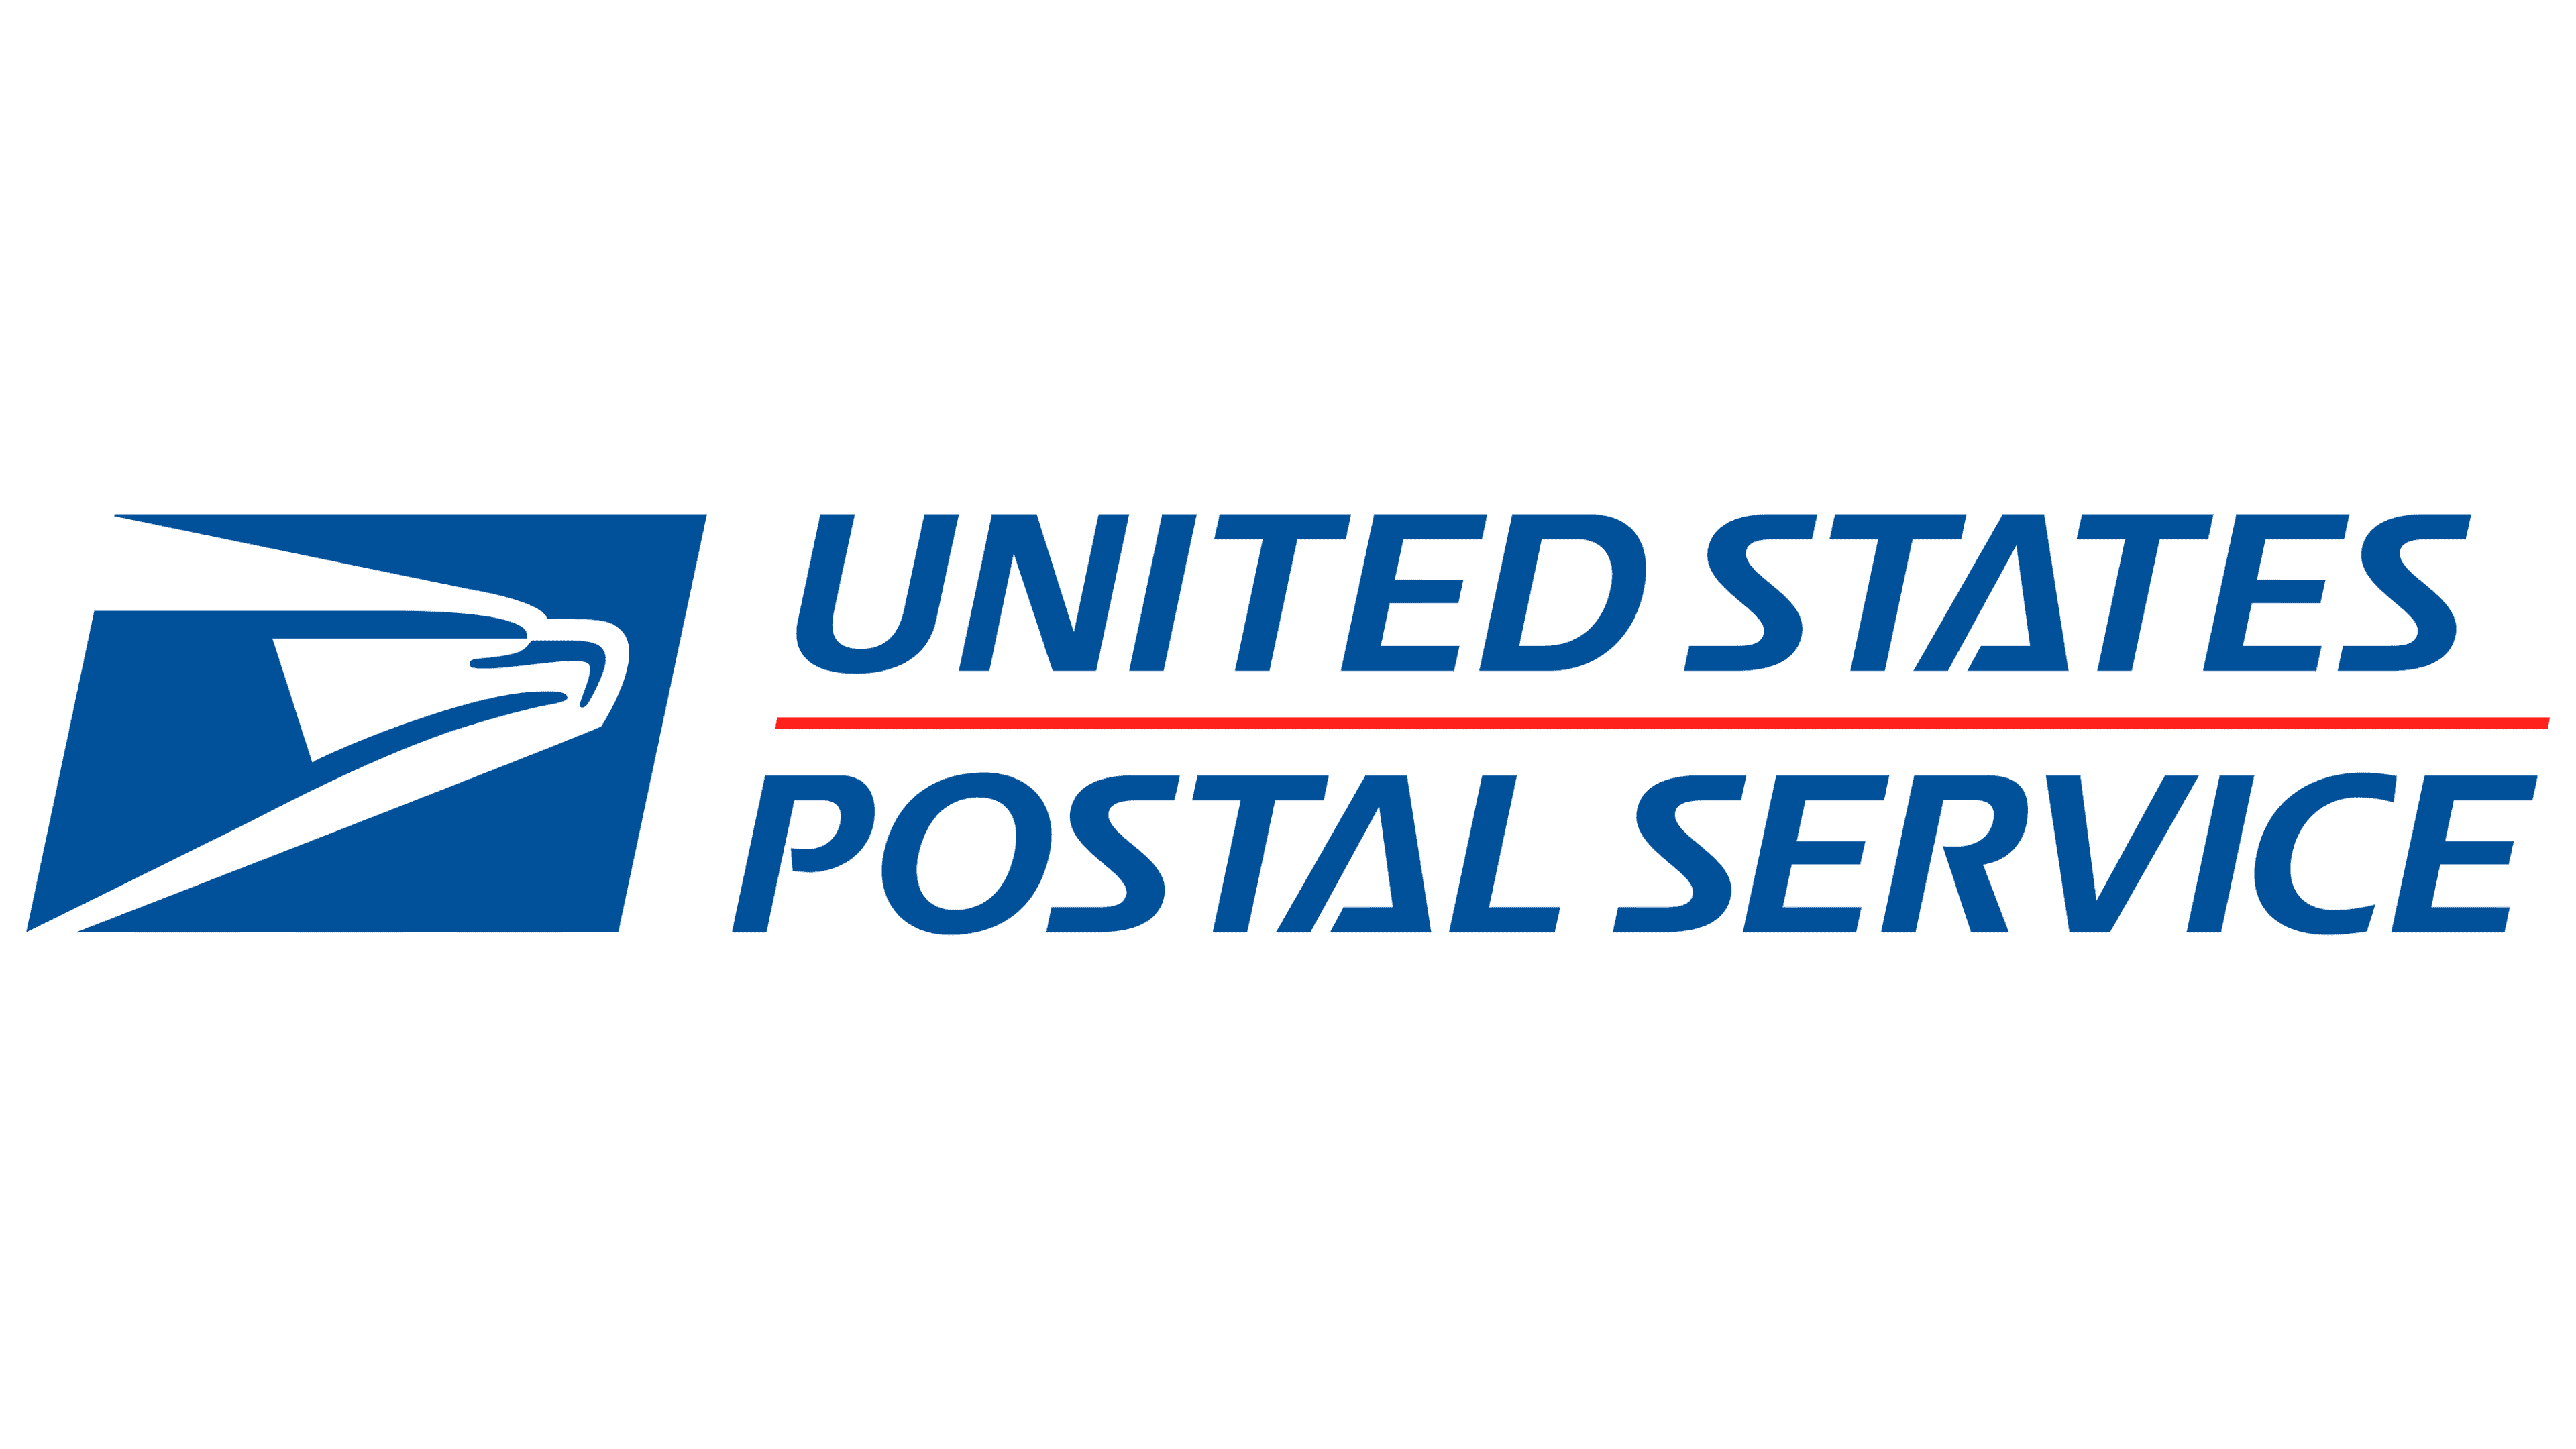 USPS Logo, PNG, Symbol, History, Meaning